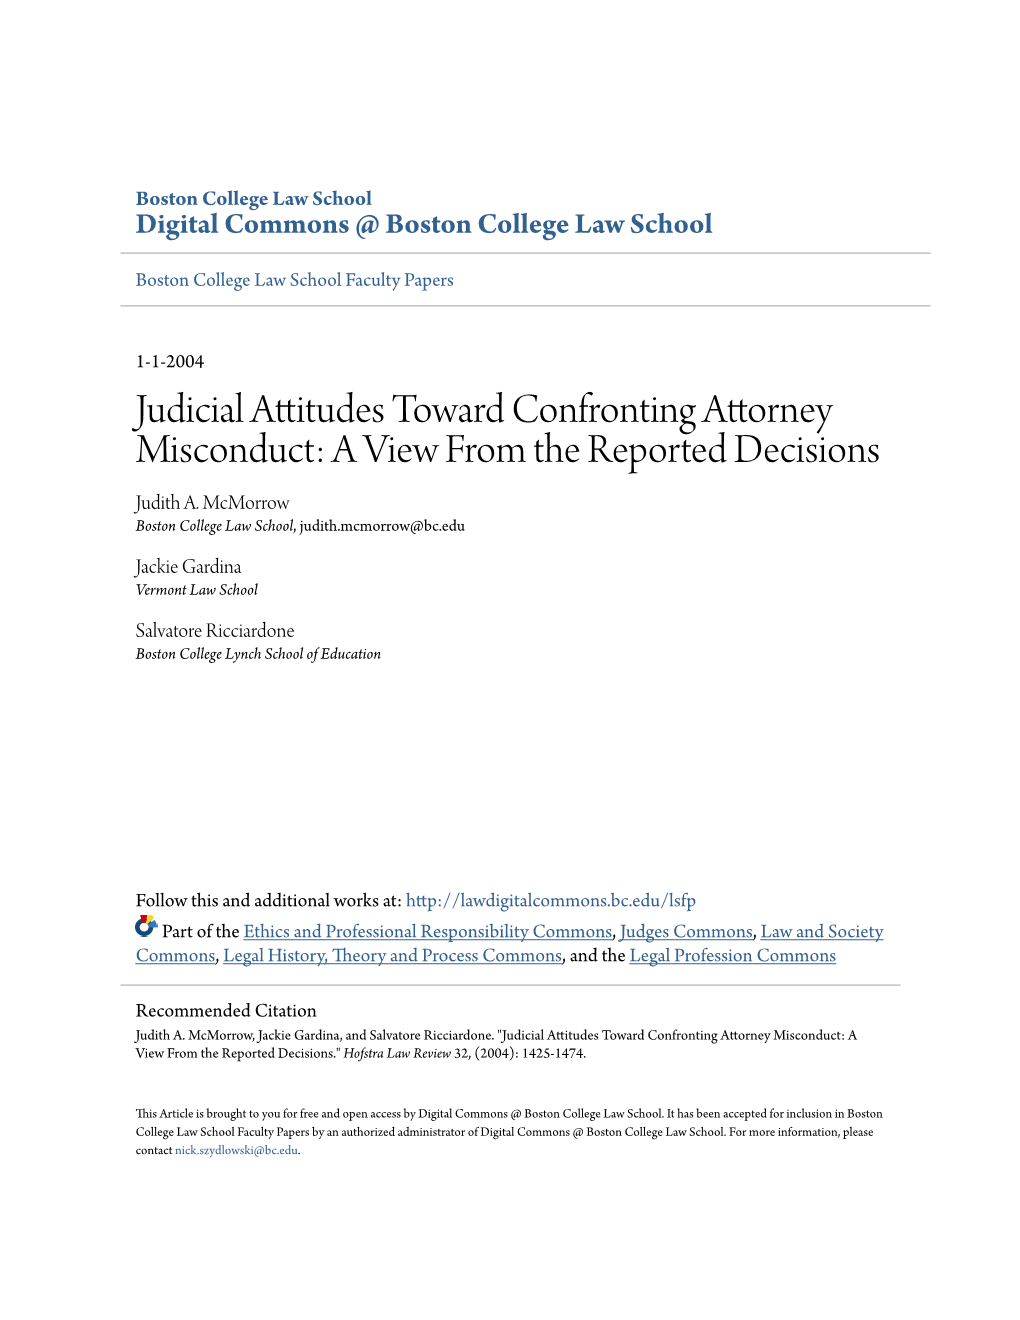 Judicial Attitudes Toward Confronting Attorney Misconduct: a View from the Reported Decisions Judith A